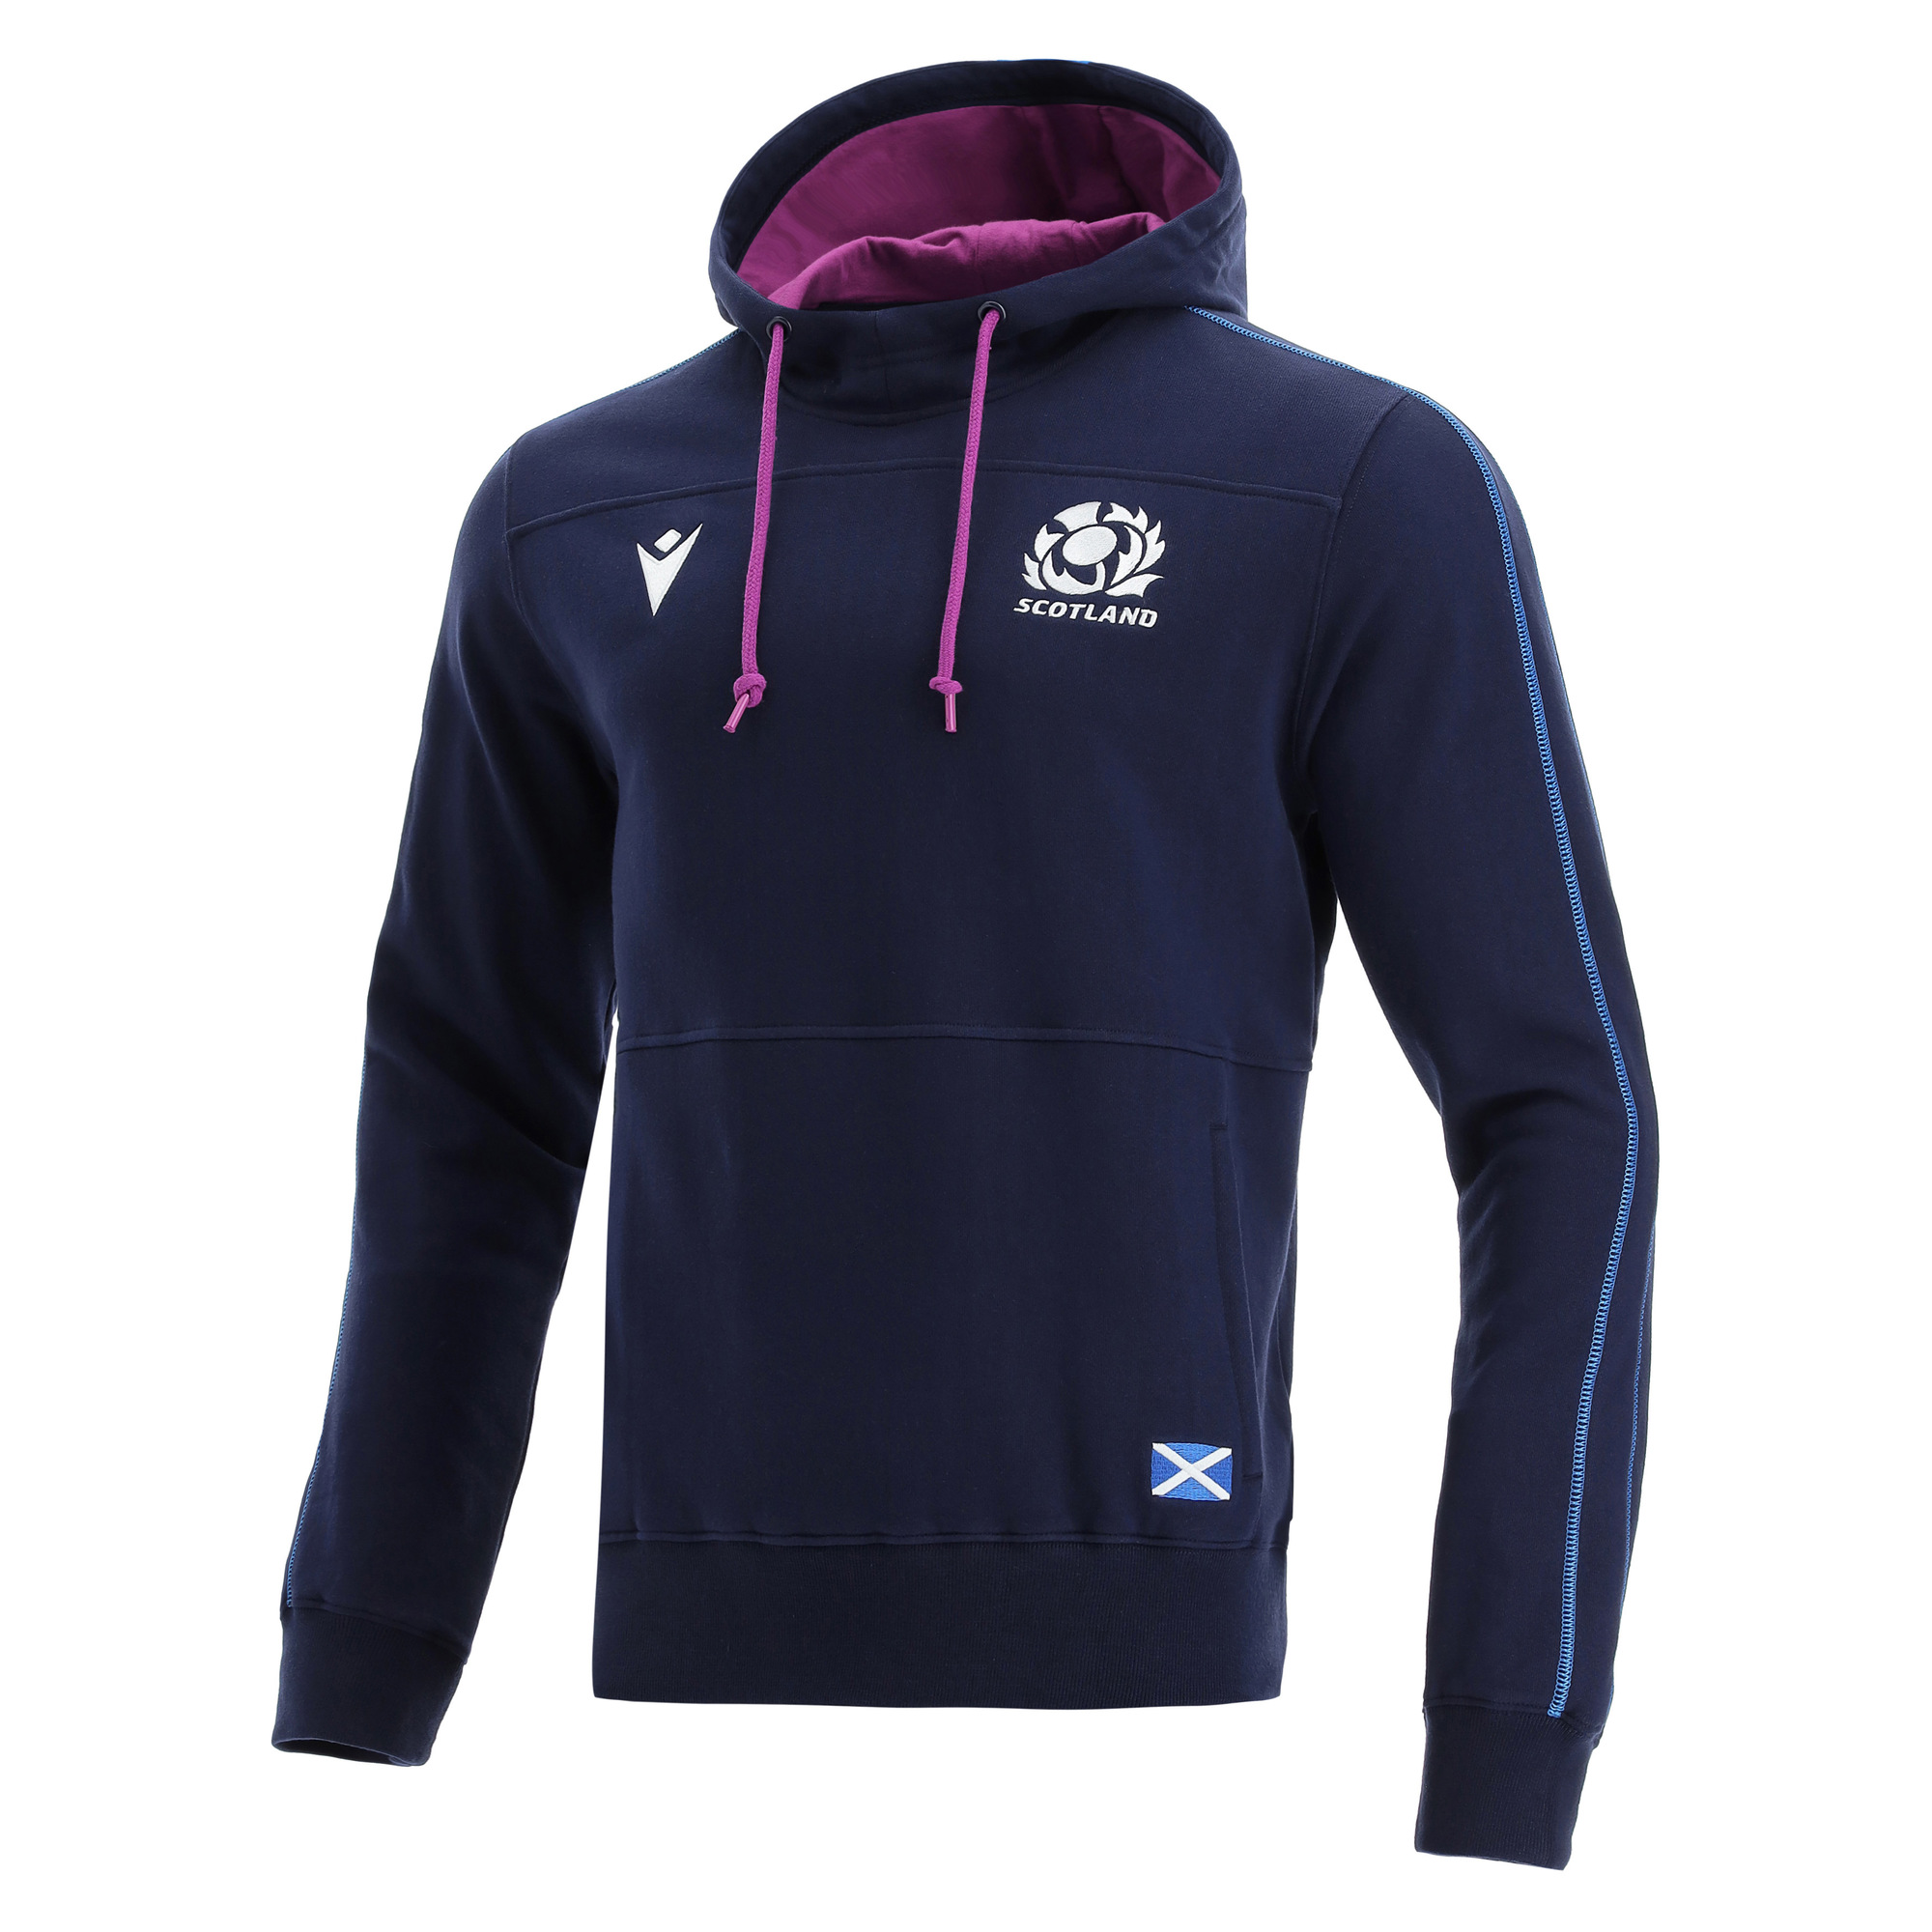 Scotland Rugby | Official Replica Clothing | The Rugby Shop